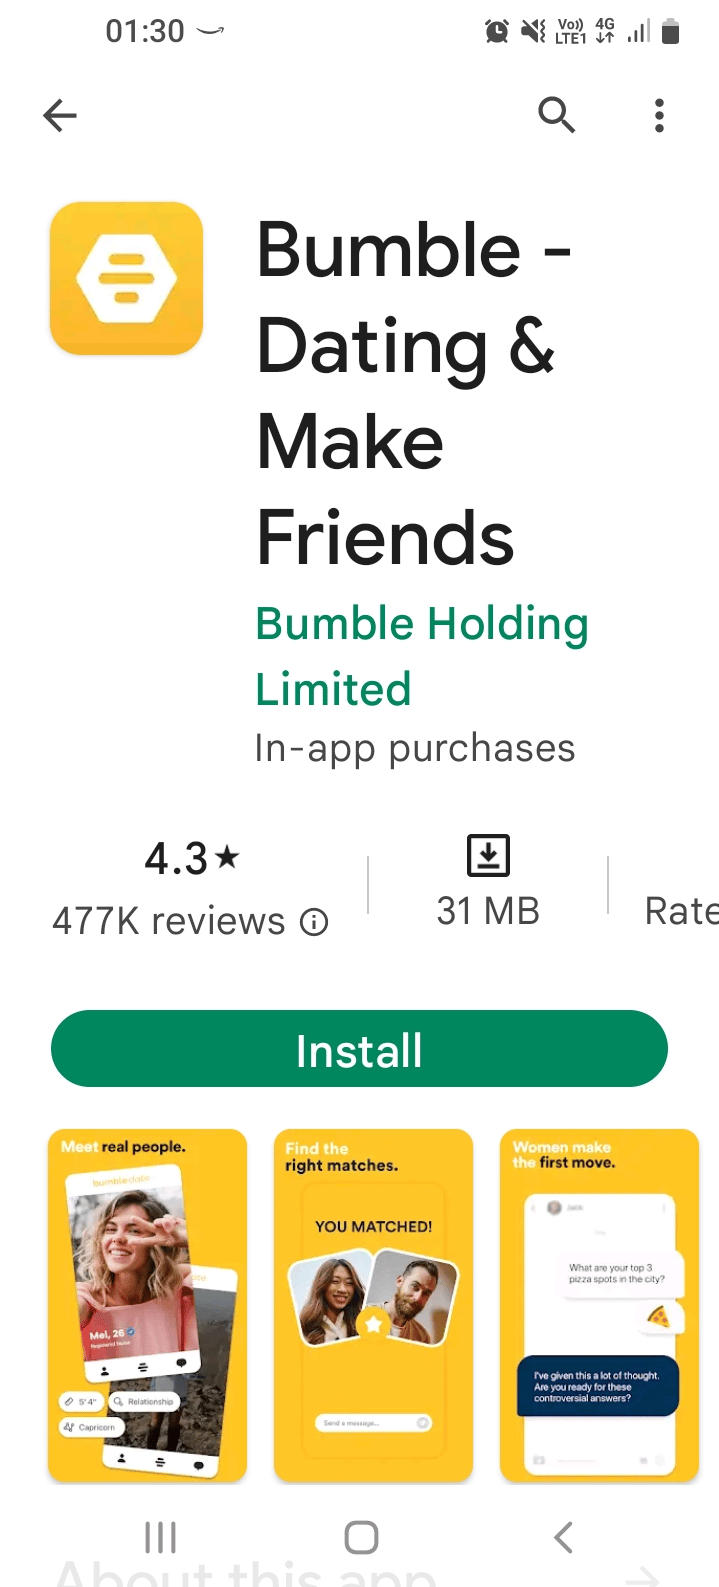 install and use the Bumble app 